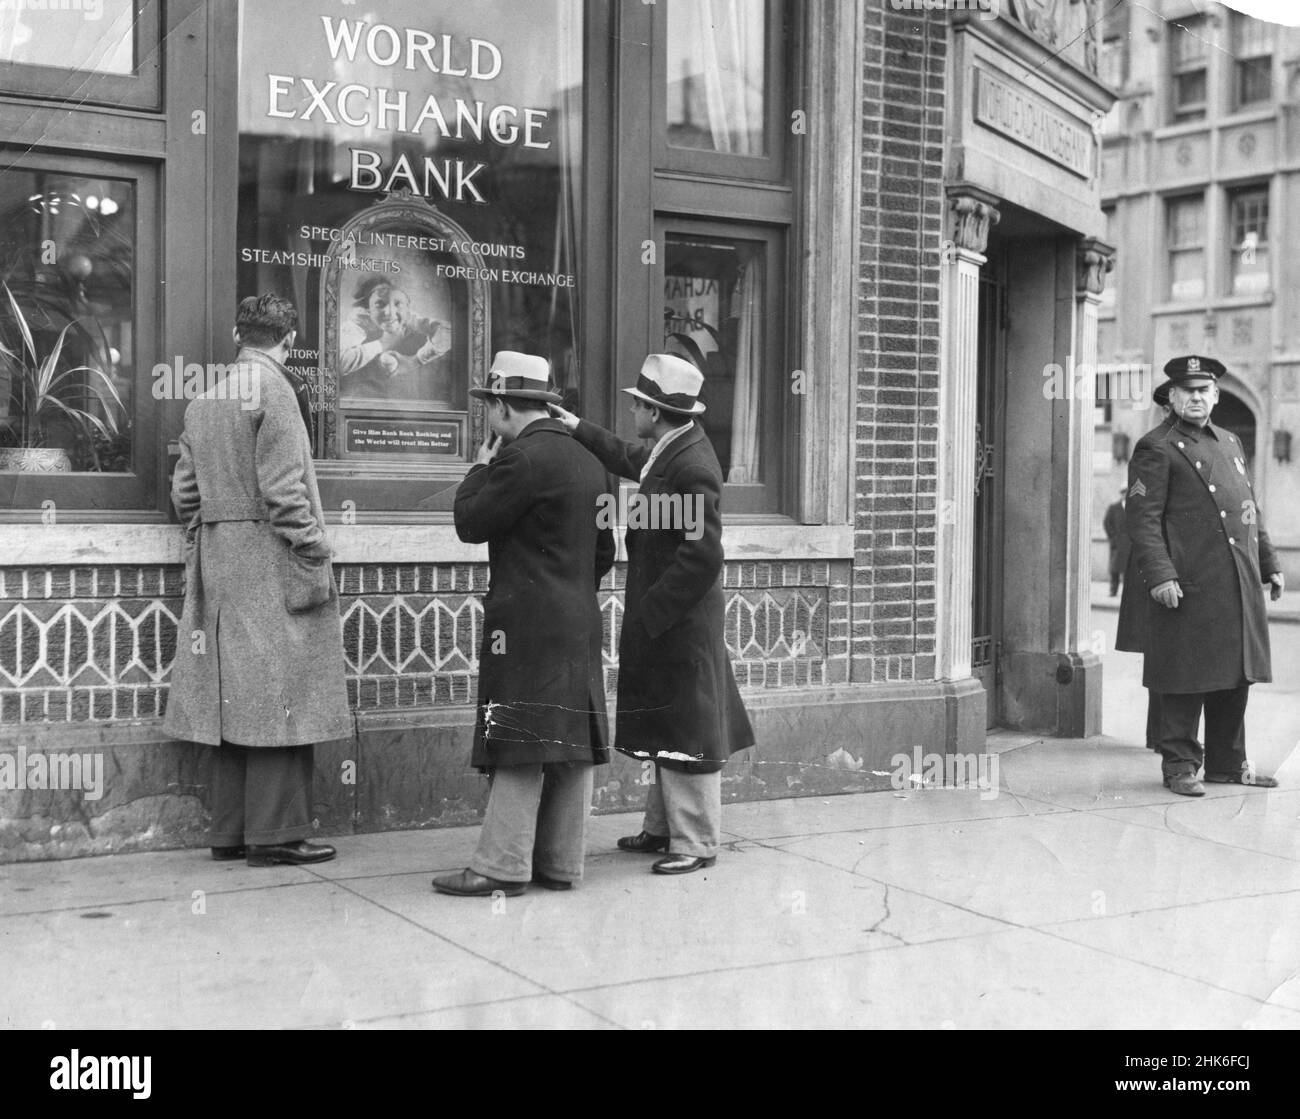 Police stand guard at the entrance to the World Exchange Bank at 174 Second Avenue, New York City, after it had been closed down due to a run on it. March 20, 1931. Stock Photo